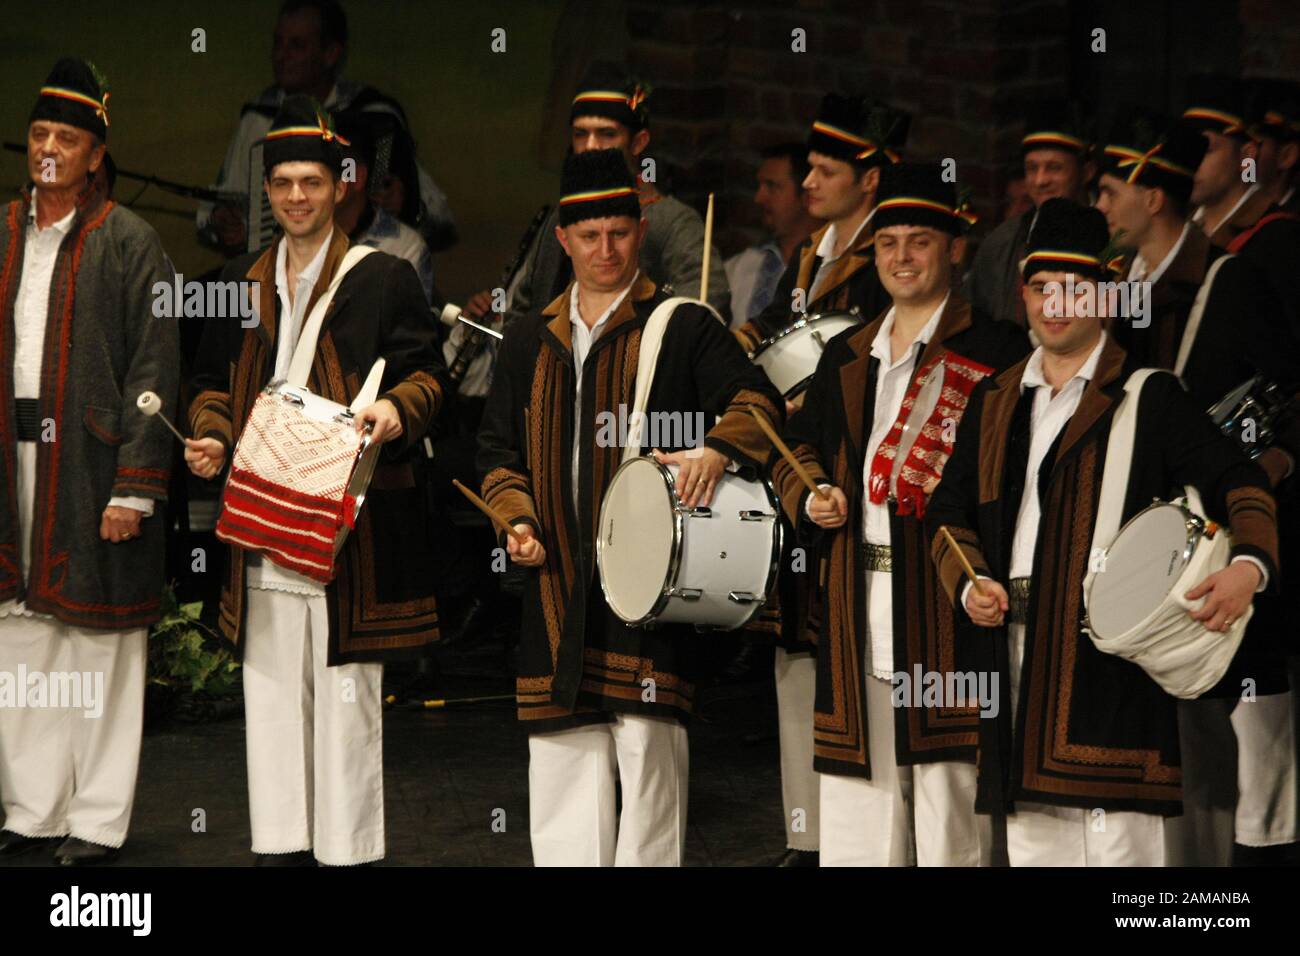 Professional dancers of the Banatul Folklore Ensemble hold hands in a traditional Romanian dance wearing traditional beautiful costumes. Stock Photo